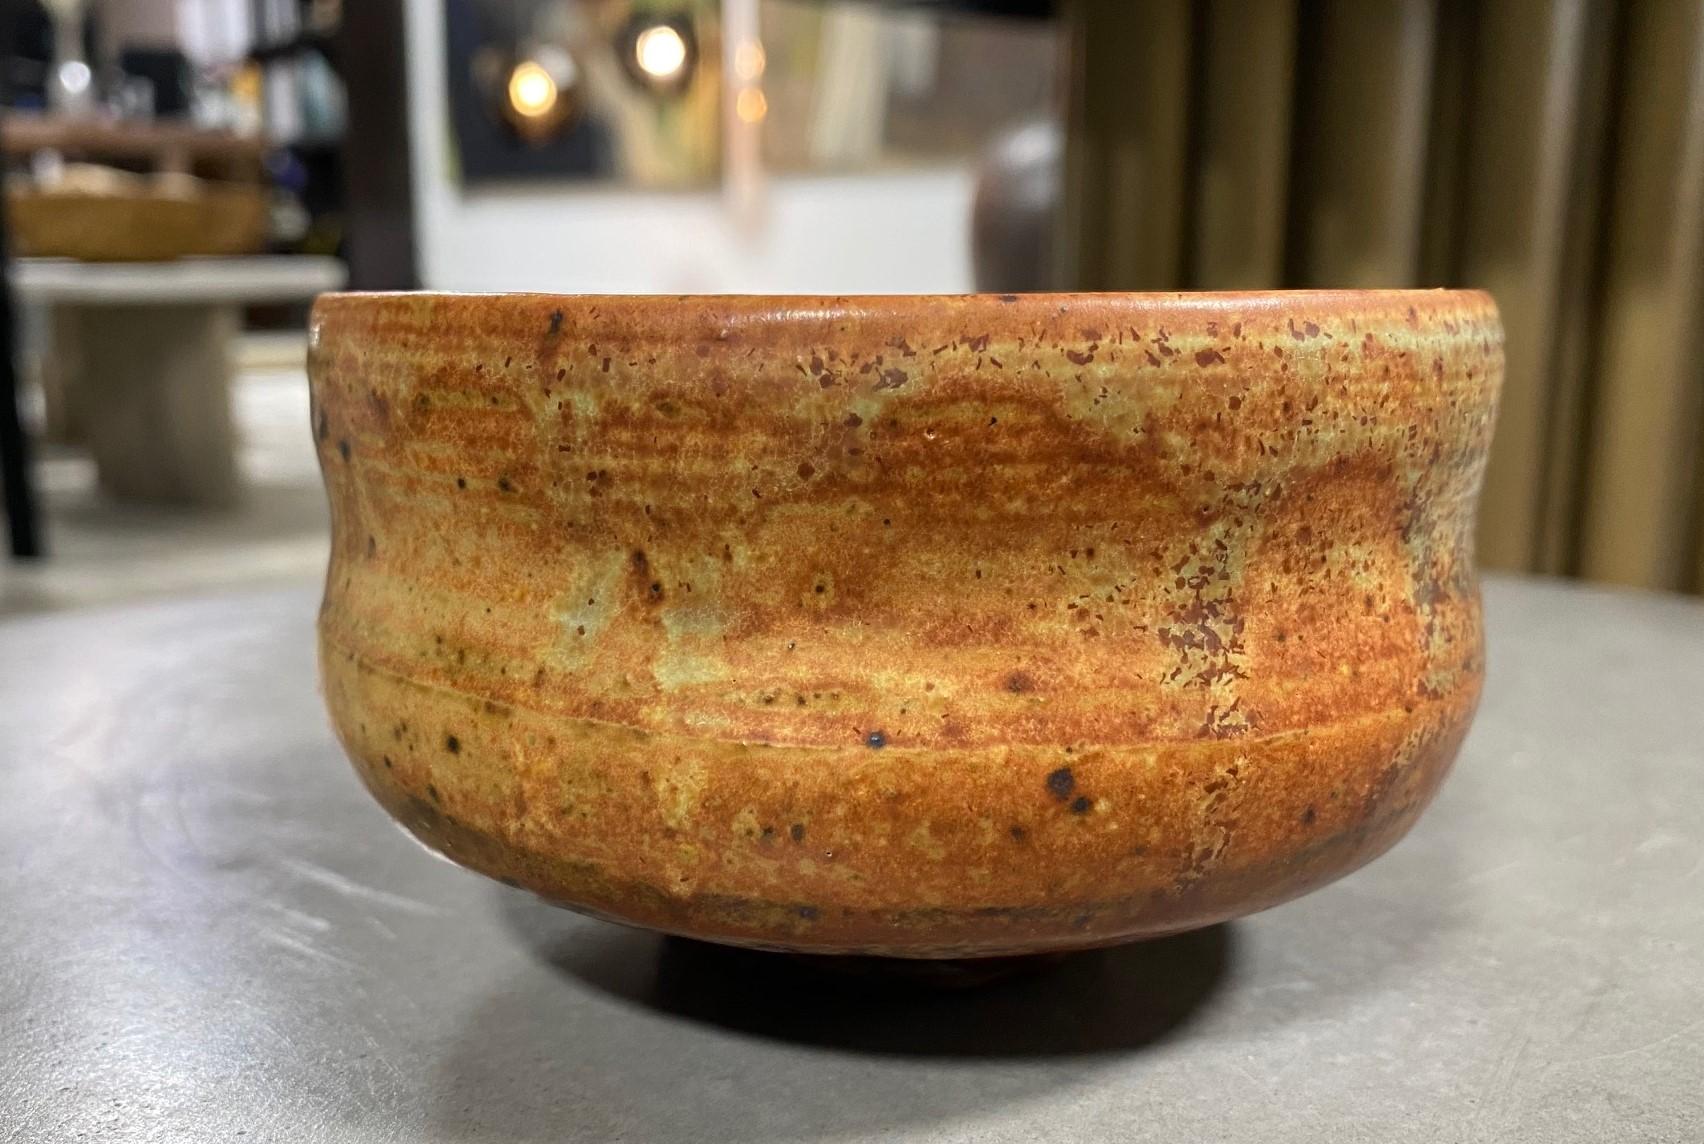 A gorgeous Japanese studio pottery chawan tea bowl that features a wonderful reddish-orange glaze with various shifts in colour and texture. 

This particular piece encompasses the Japanese Wabi-Sabi aesthetic (which is so revered and coveted in